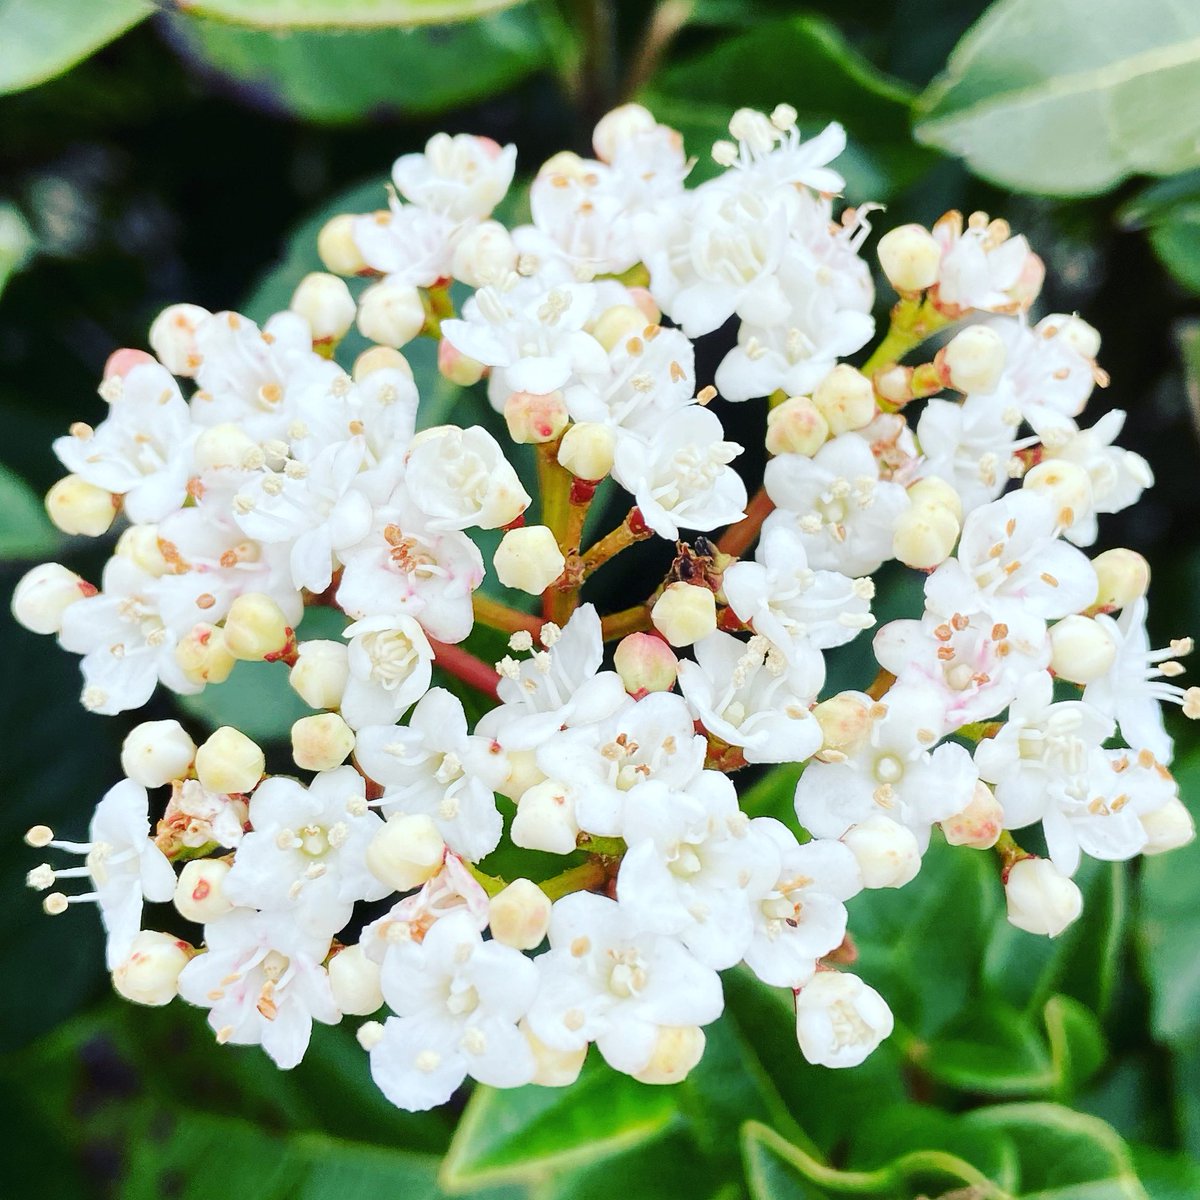 Viburnum flowers are popping up everywhere! Robust shrubs with tiny delicate individual blooms creating one big impact floral display! #lovespringflowers #hopeforthefuture #timepasses #nextweekflorals #scones_sunflowers #whiteflowers #spring #seethedifference #feelthedifference